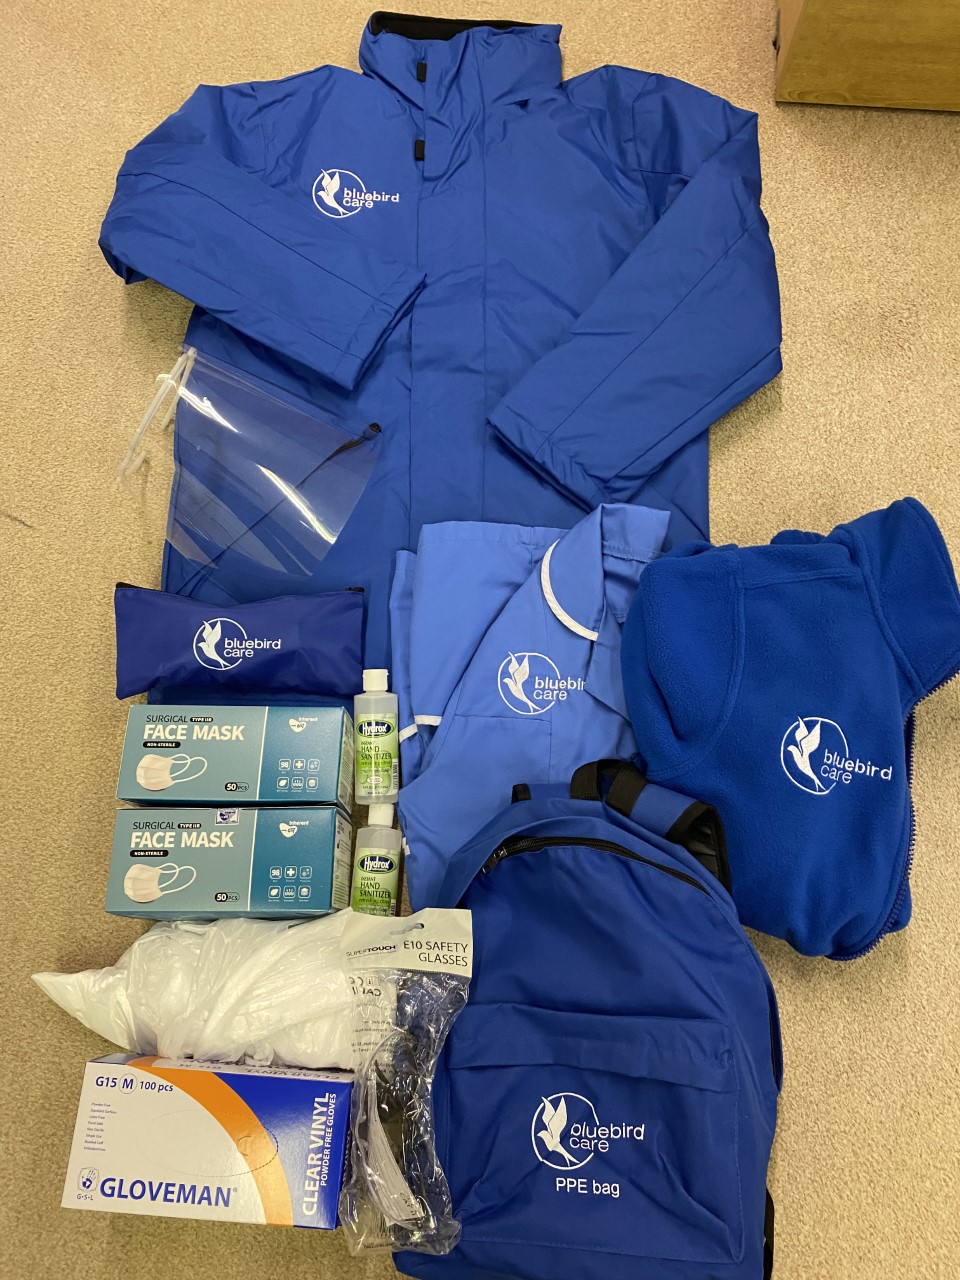 Bluebird Care PPE distributed to all care staff